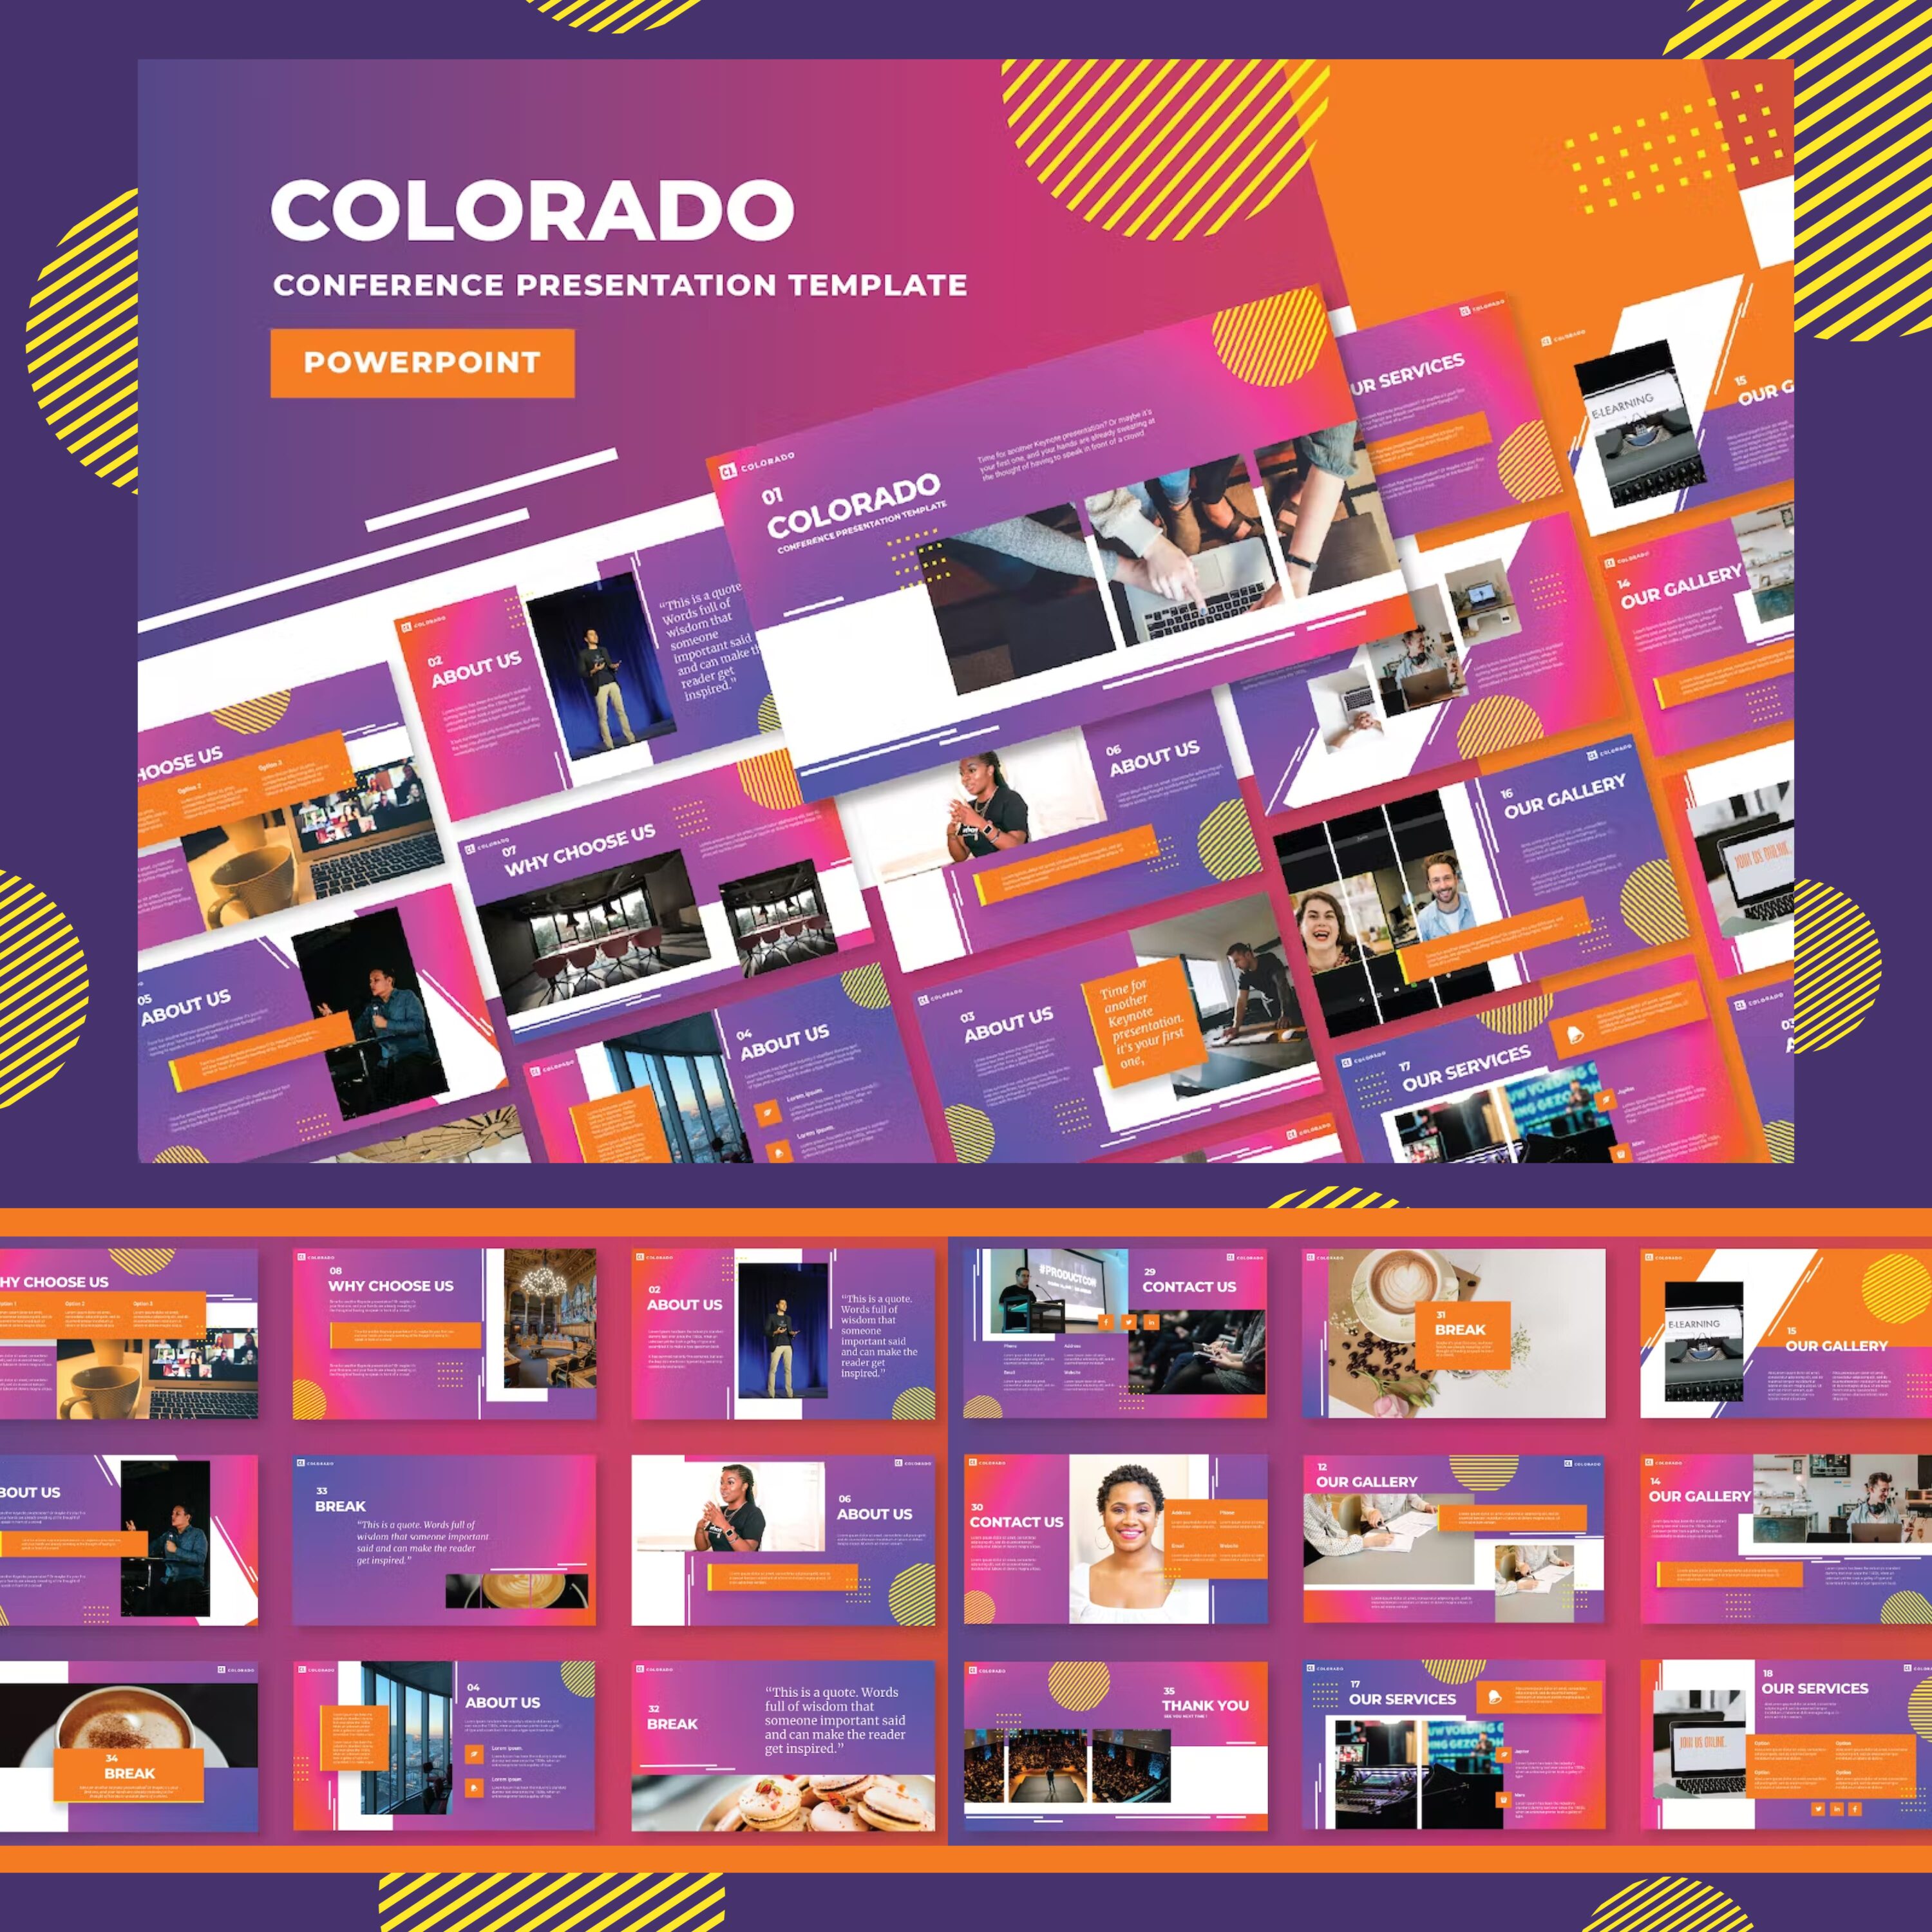 Colorado conference powerpoint template illustrations.